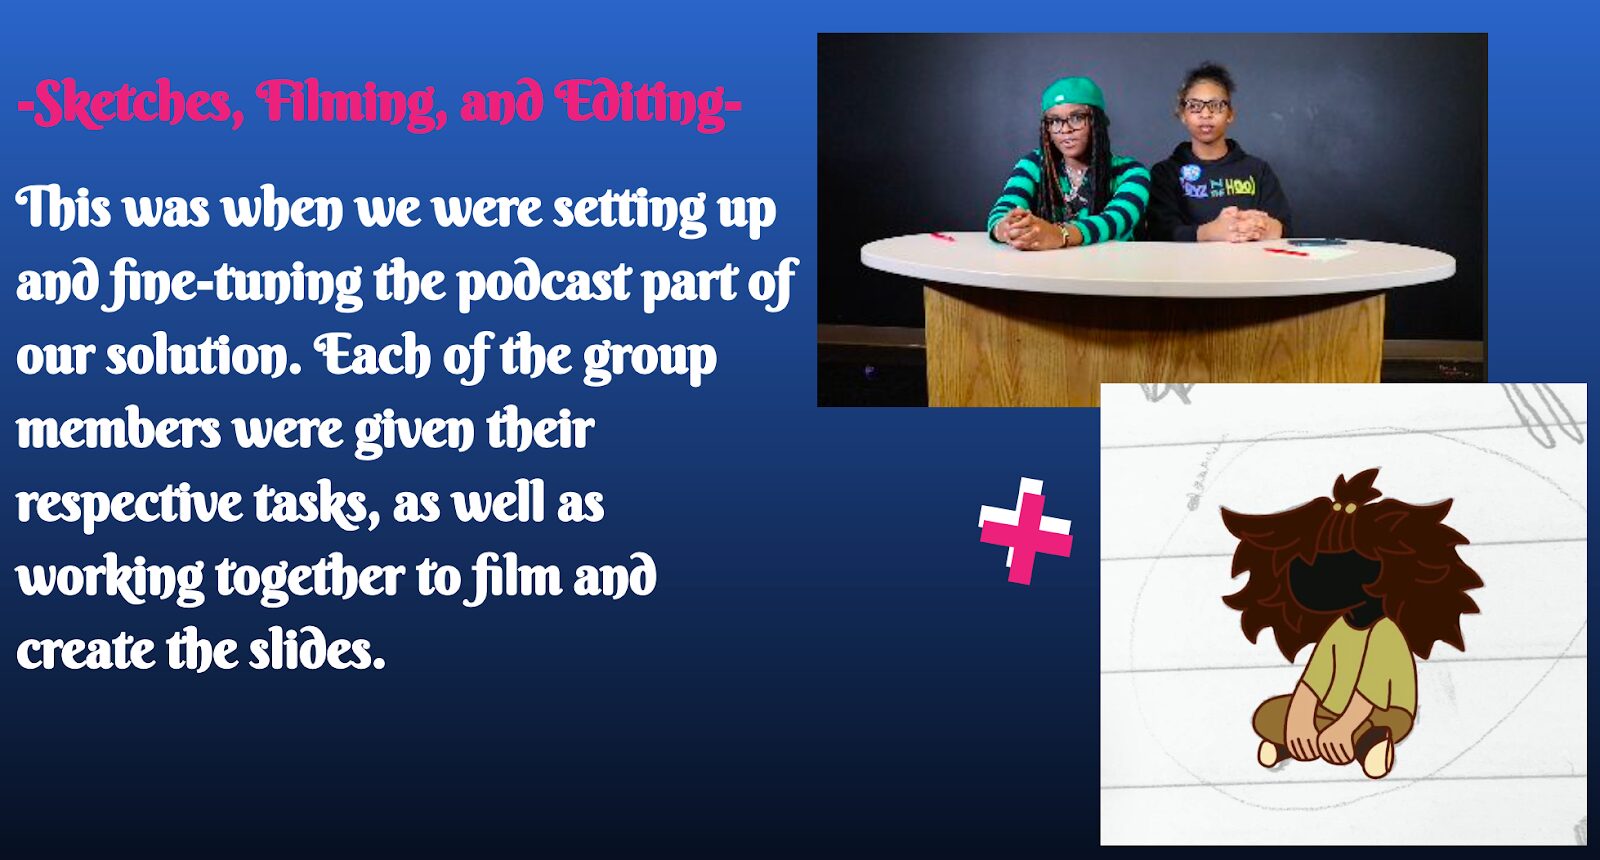 A slide explaining how the group divided roles between sketching, filming, and editing. The slide has a picture of two students at a studio desk above an image of an illustrated character.